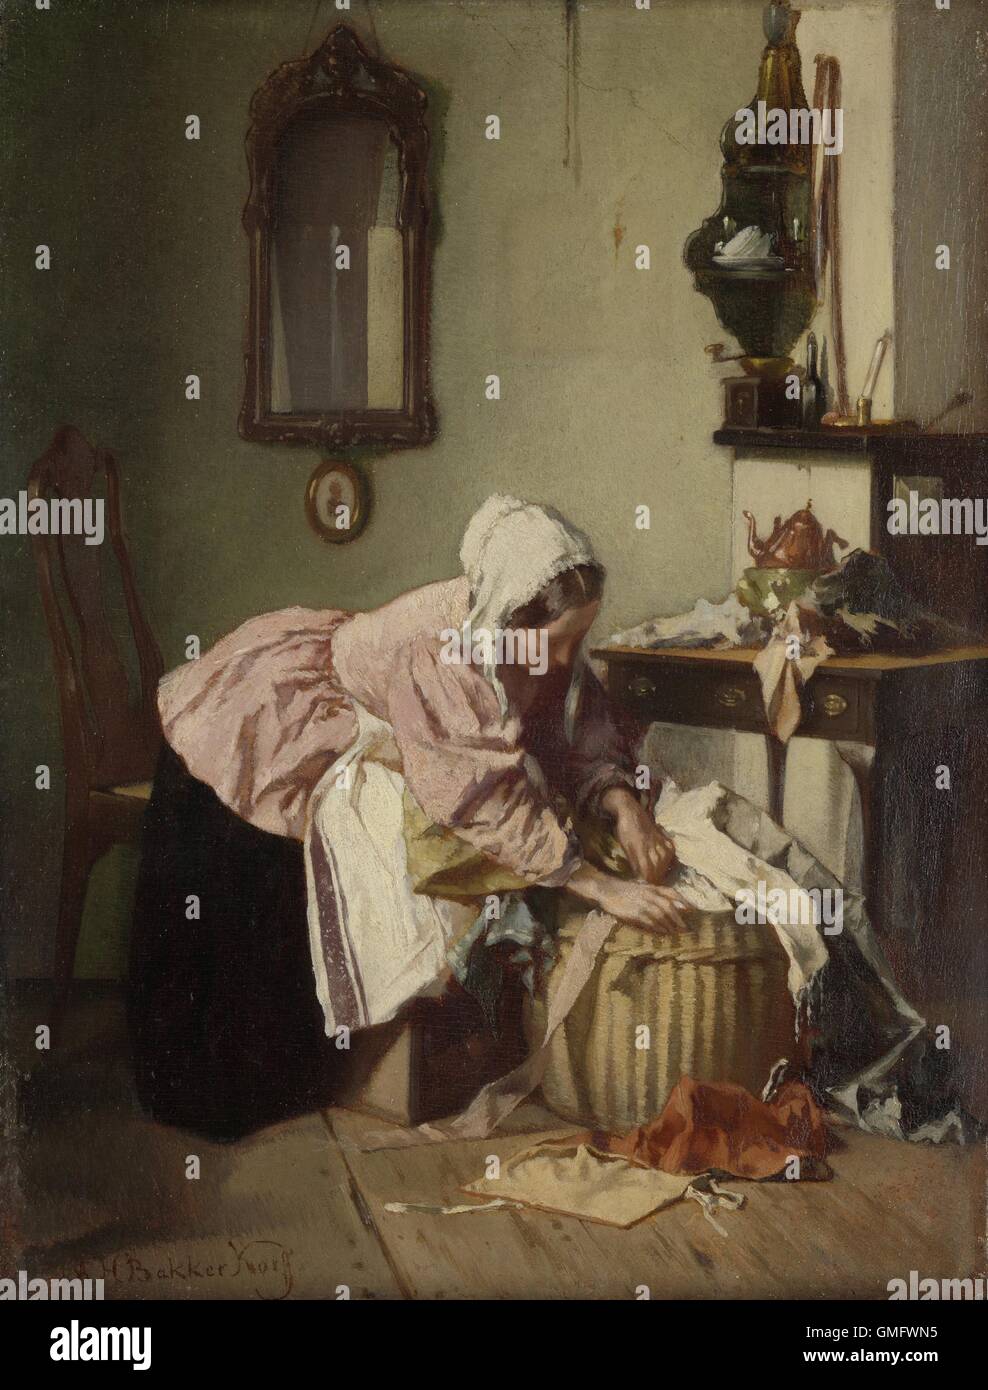 The Rag Basket, by Alexander Hugo Bakker Korff, c. 1860-1880, Dutch painting, oil on panel. A seated young woman searches 'scrapheap', a basket filled with pieces of cloth. (BSLOC 2016 1 54) Stock Photo